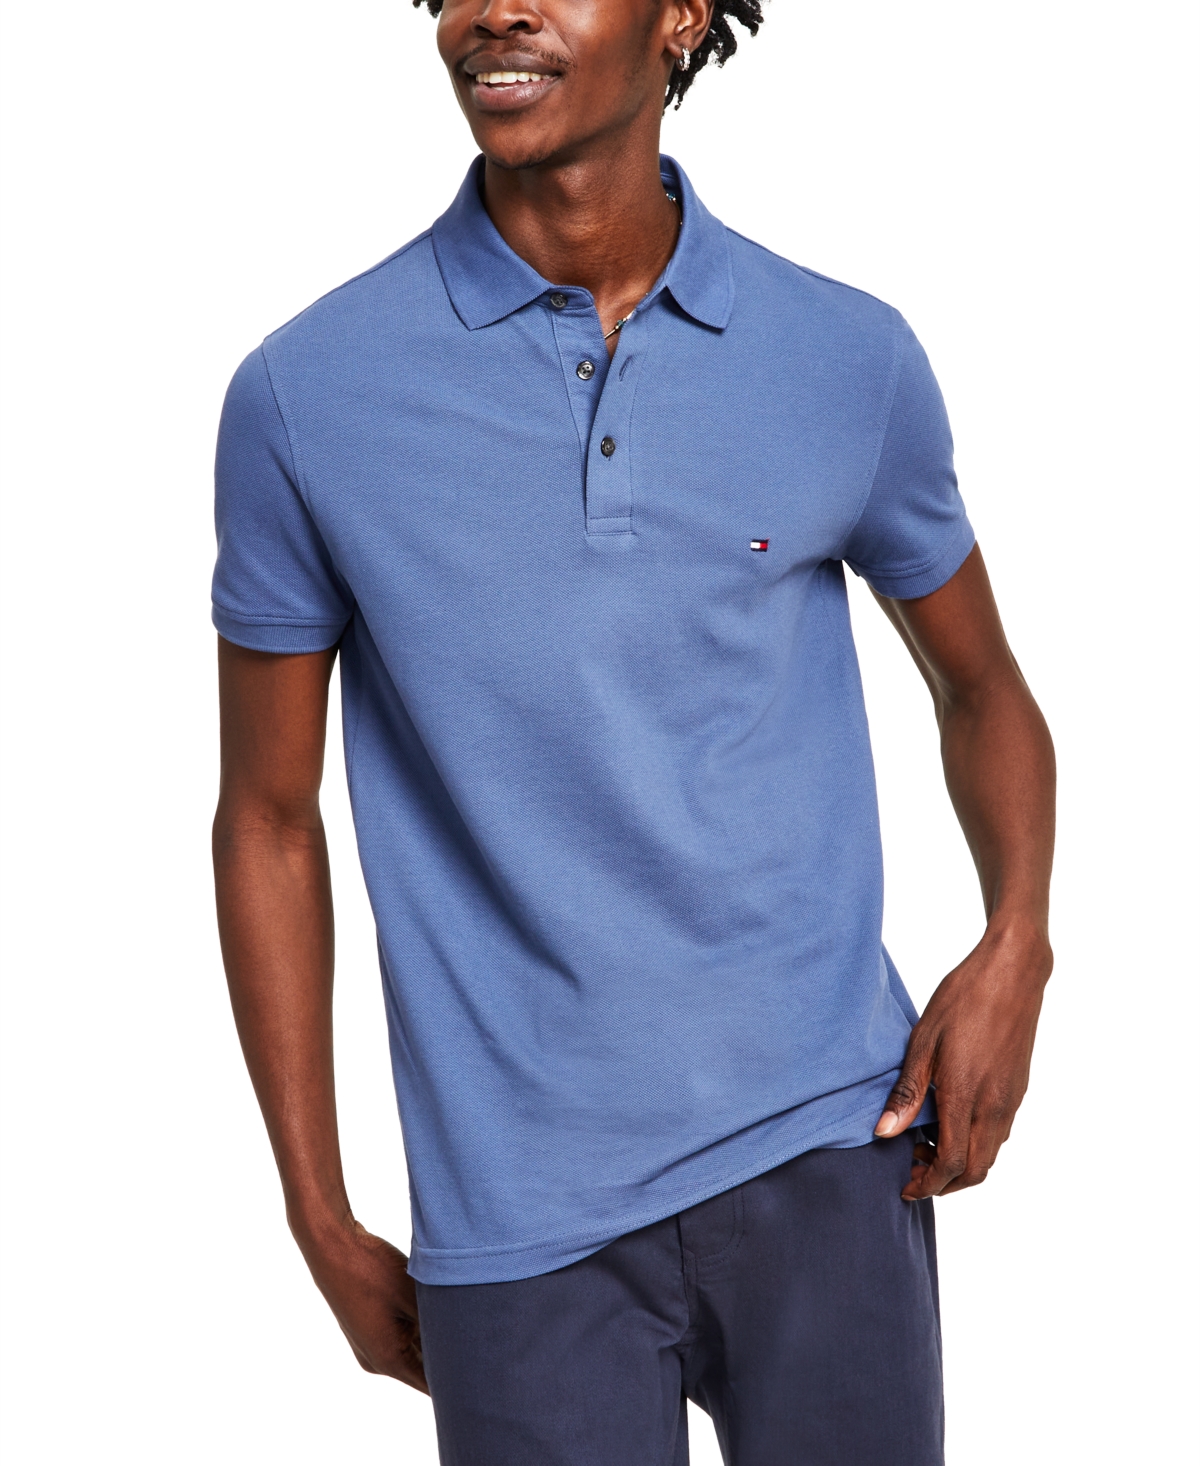 Tommy Hilfiger Men's 1985 Heather Classic Fit Short Sleeve Polo In Faded Indigo Heather